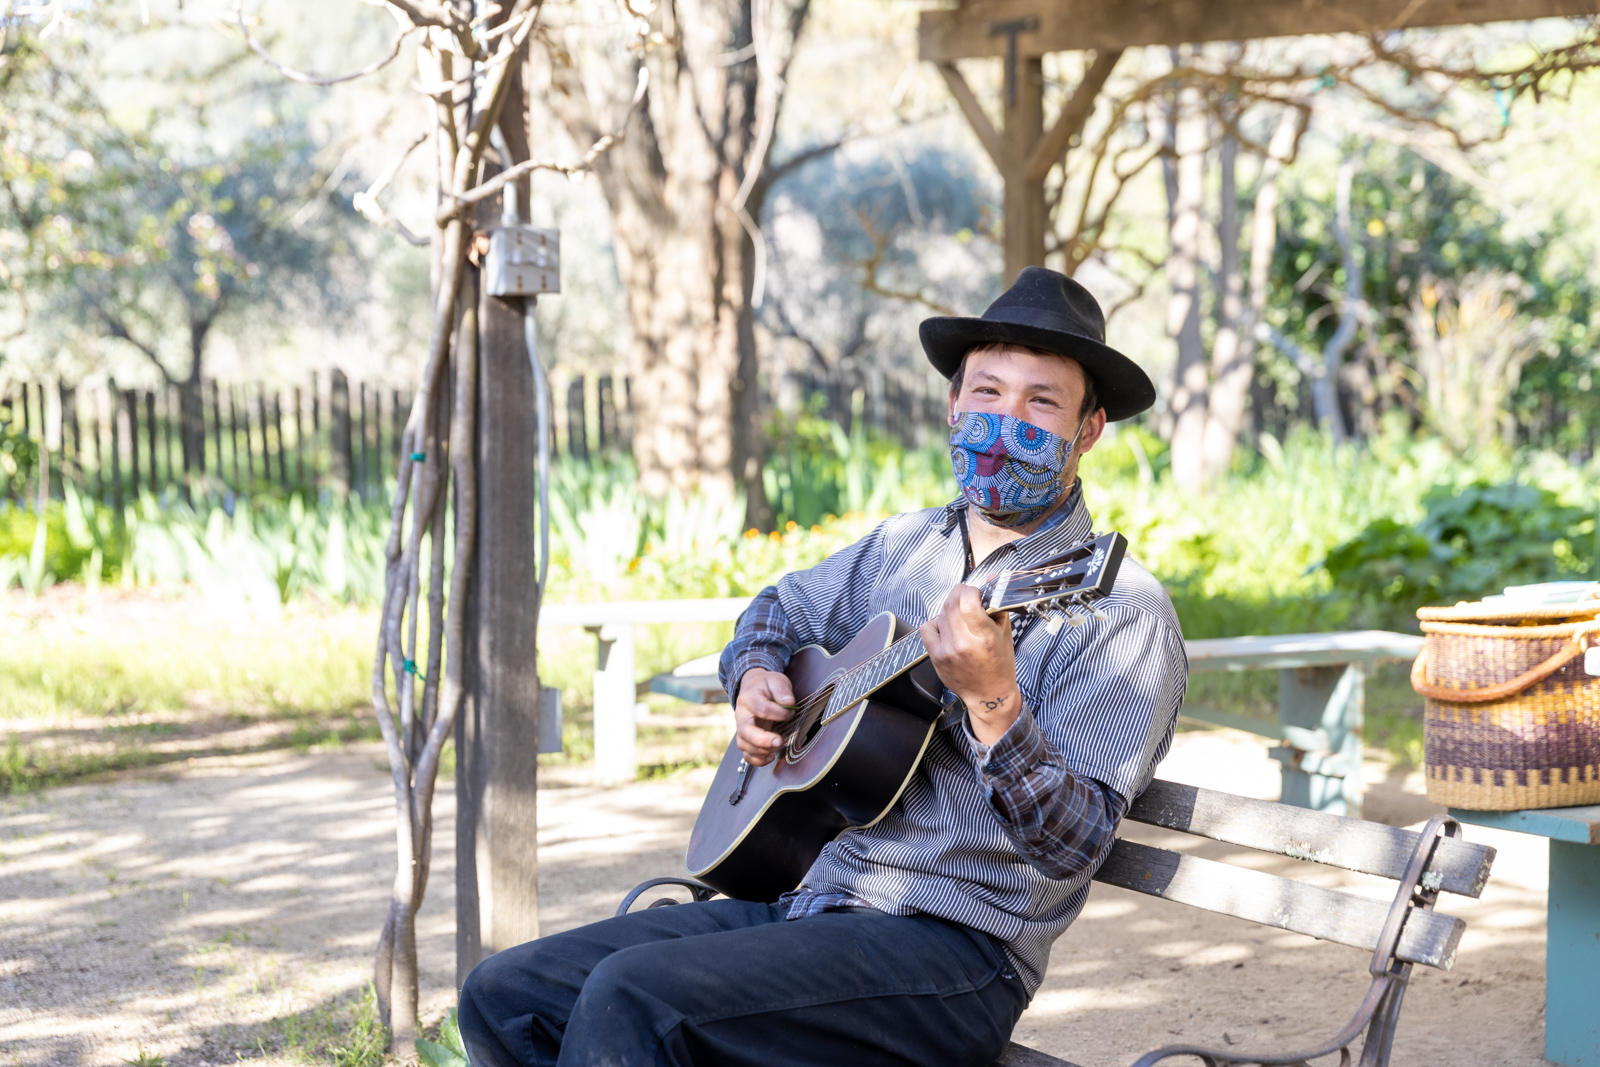 A man wearing a black hat while strumming a guitar and sitting on a bench.